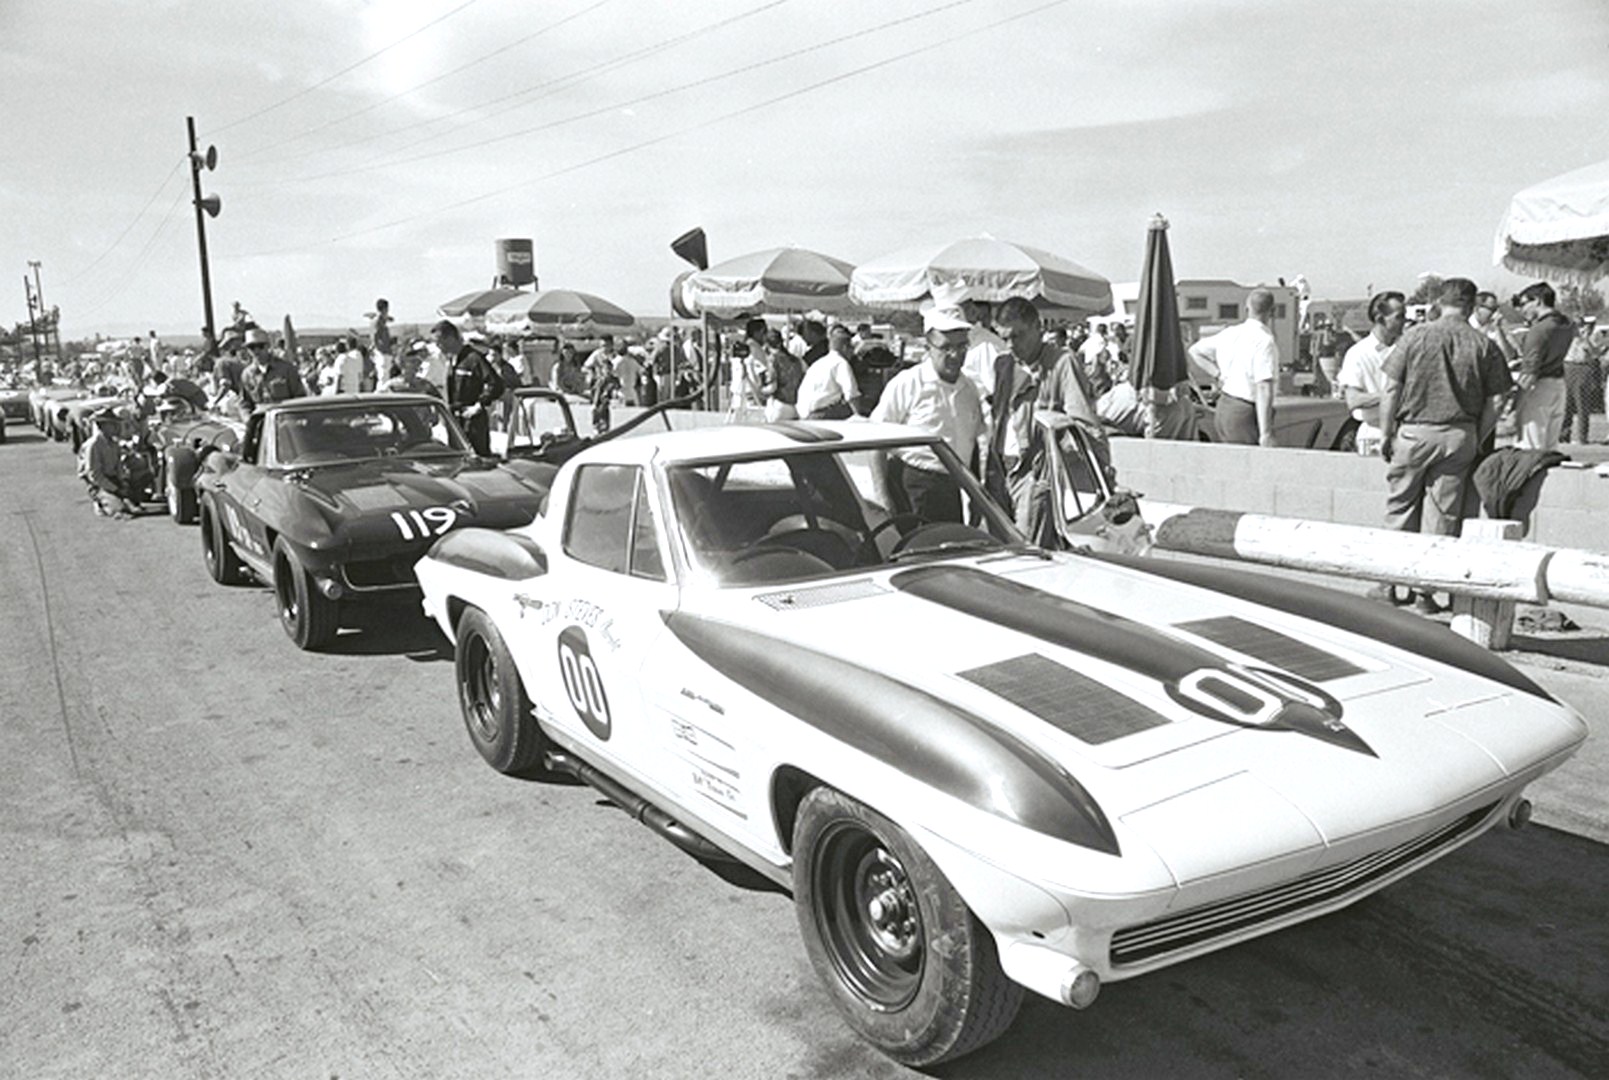 Bill Thomas helped prepare Dave MacDonald's Stingray for the race against Shelby's Cobra